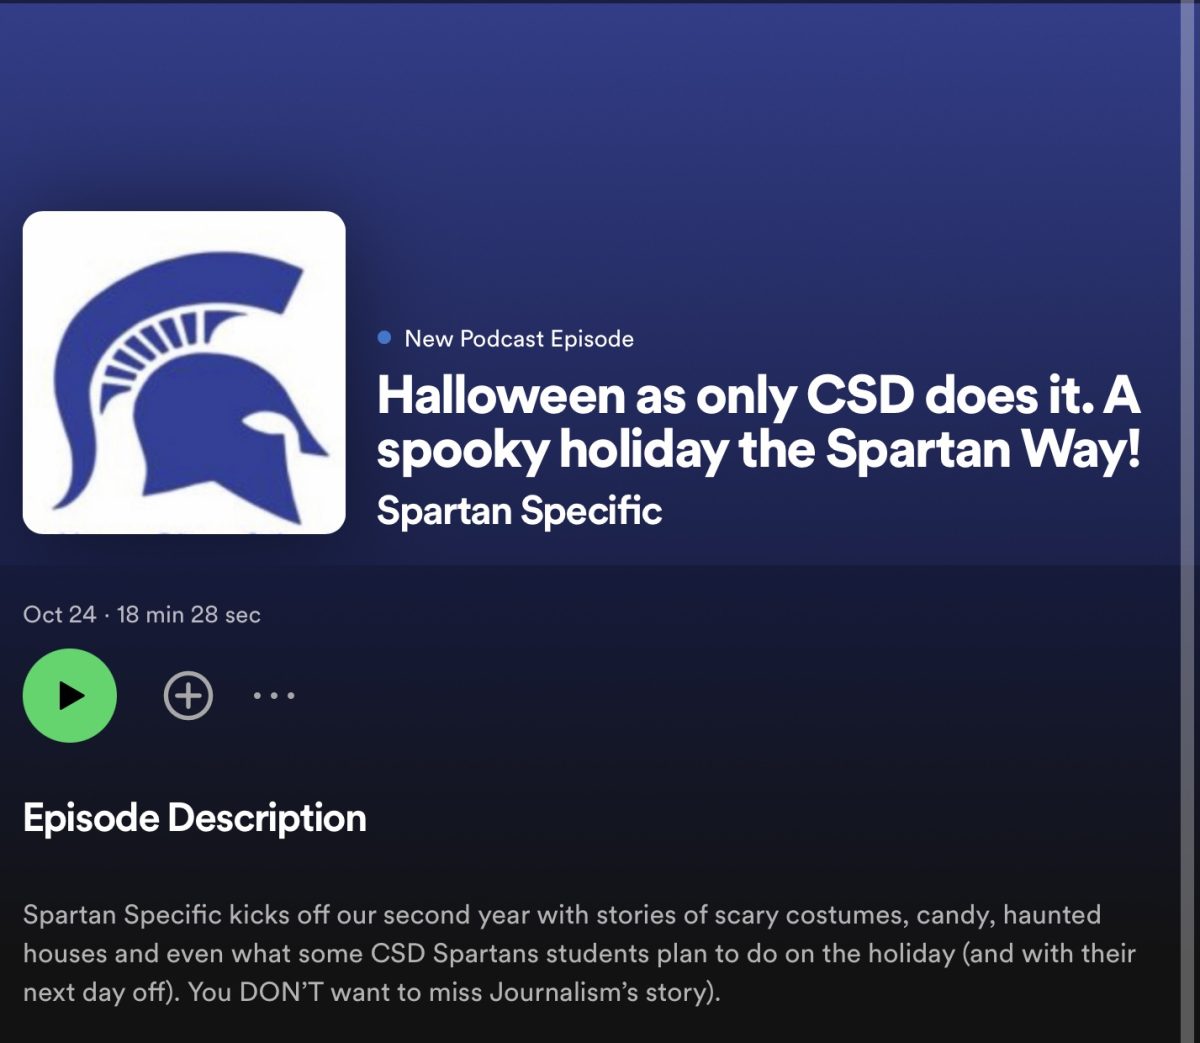 They always popular “Spartan Specific”Halloween episode kicks off our second year. Listen and learn all things about the spookiest, scariest holiday on the calendar. 